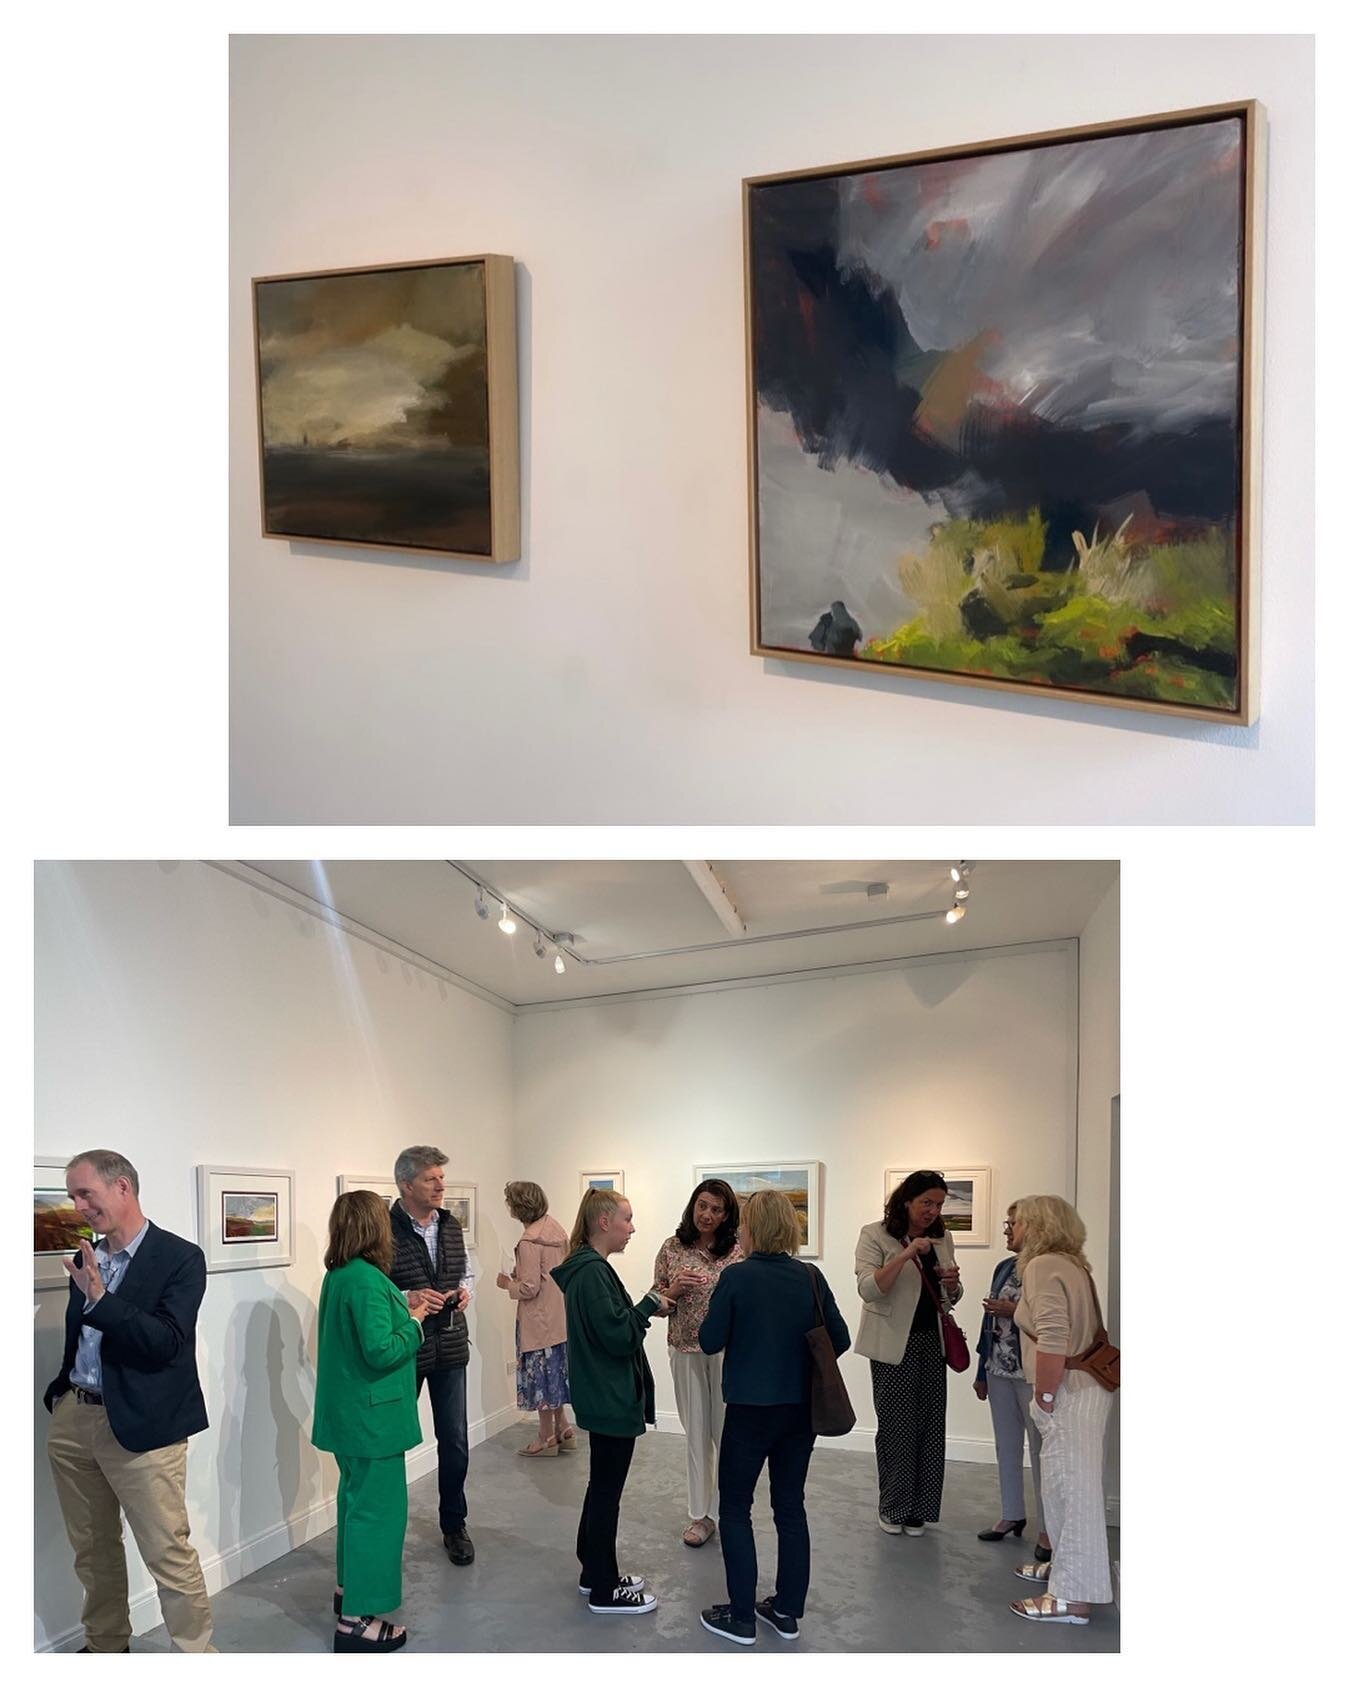 🍷 We had a wonderful opening for @stephanie_mclaughlin_art &lsquo;s exhibition &rsquo;Grounded&rsquo; on Monday evening.
🗓 Open daily from 11am-4pm until this Sunday 28th August
📍Engage Art Studios, Churchfields, Salthill